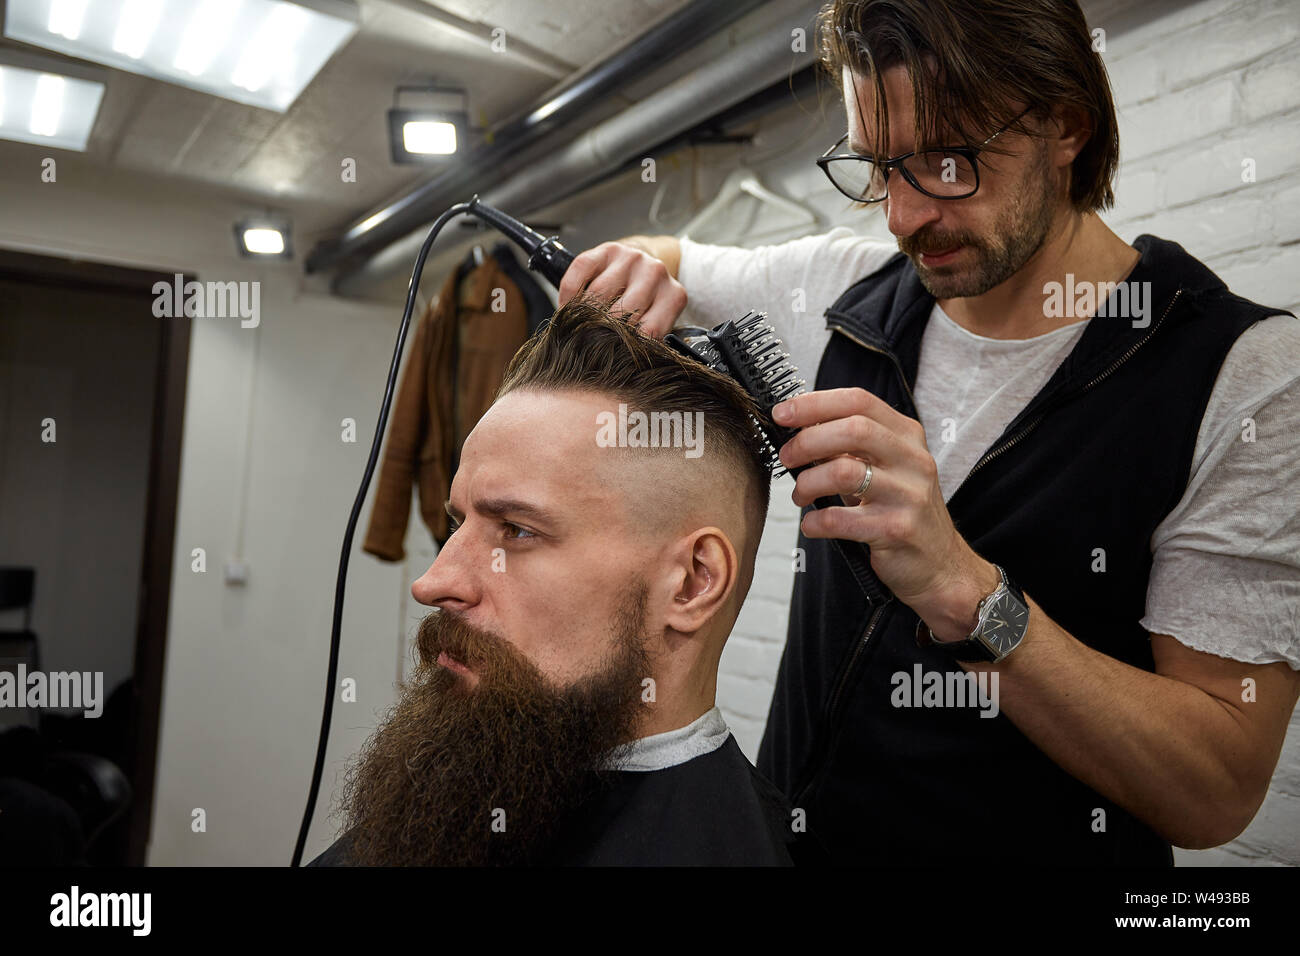 Master Cuts Hair And Beard Of Men In The Barbershop Hairdresser